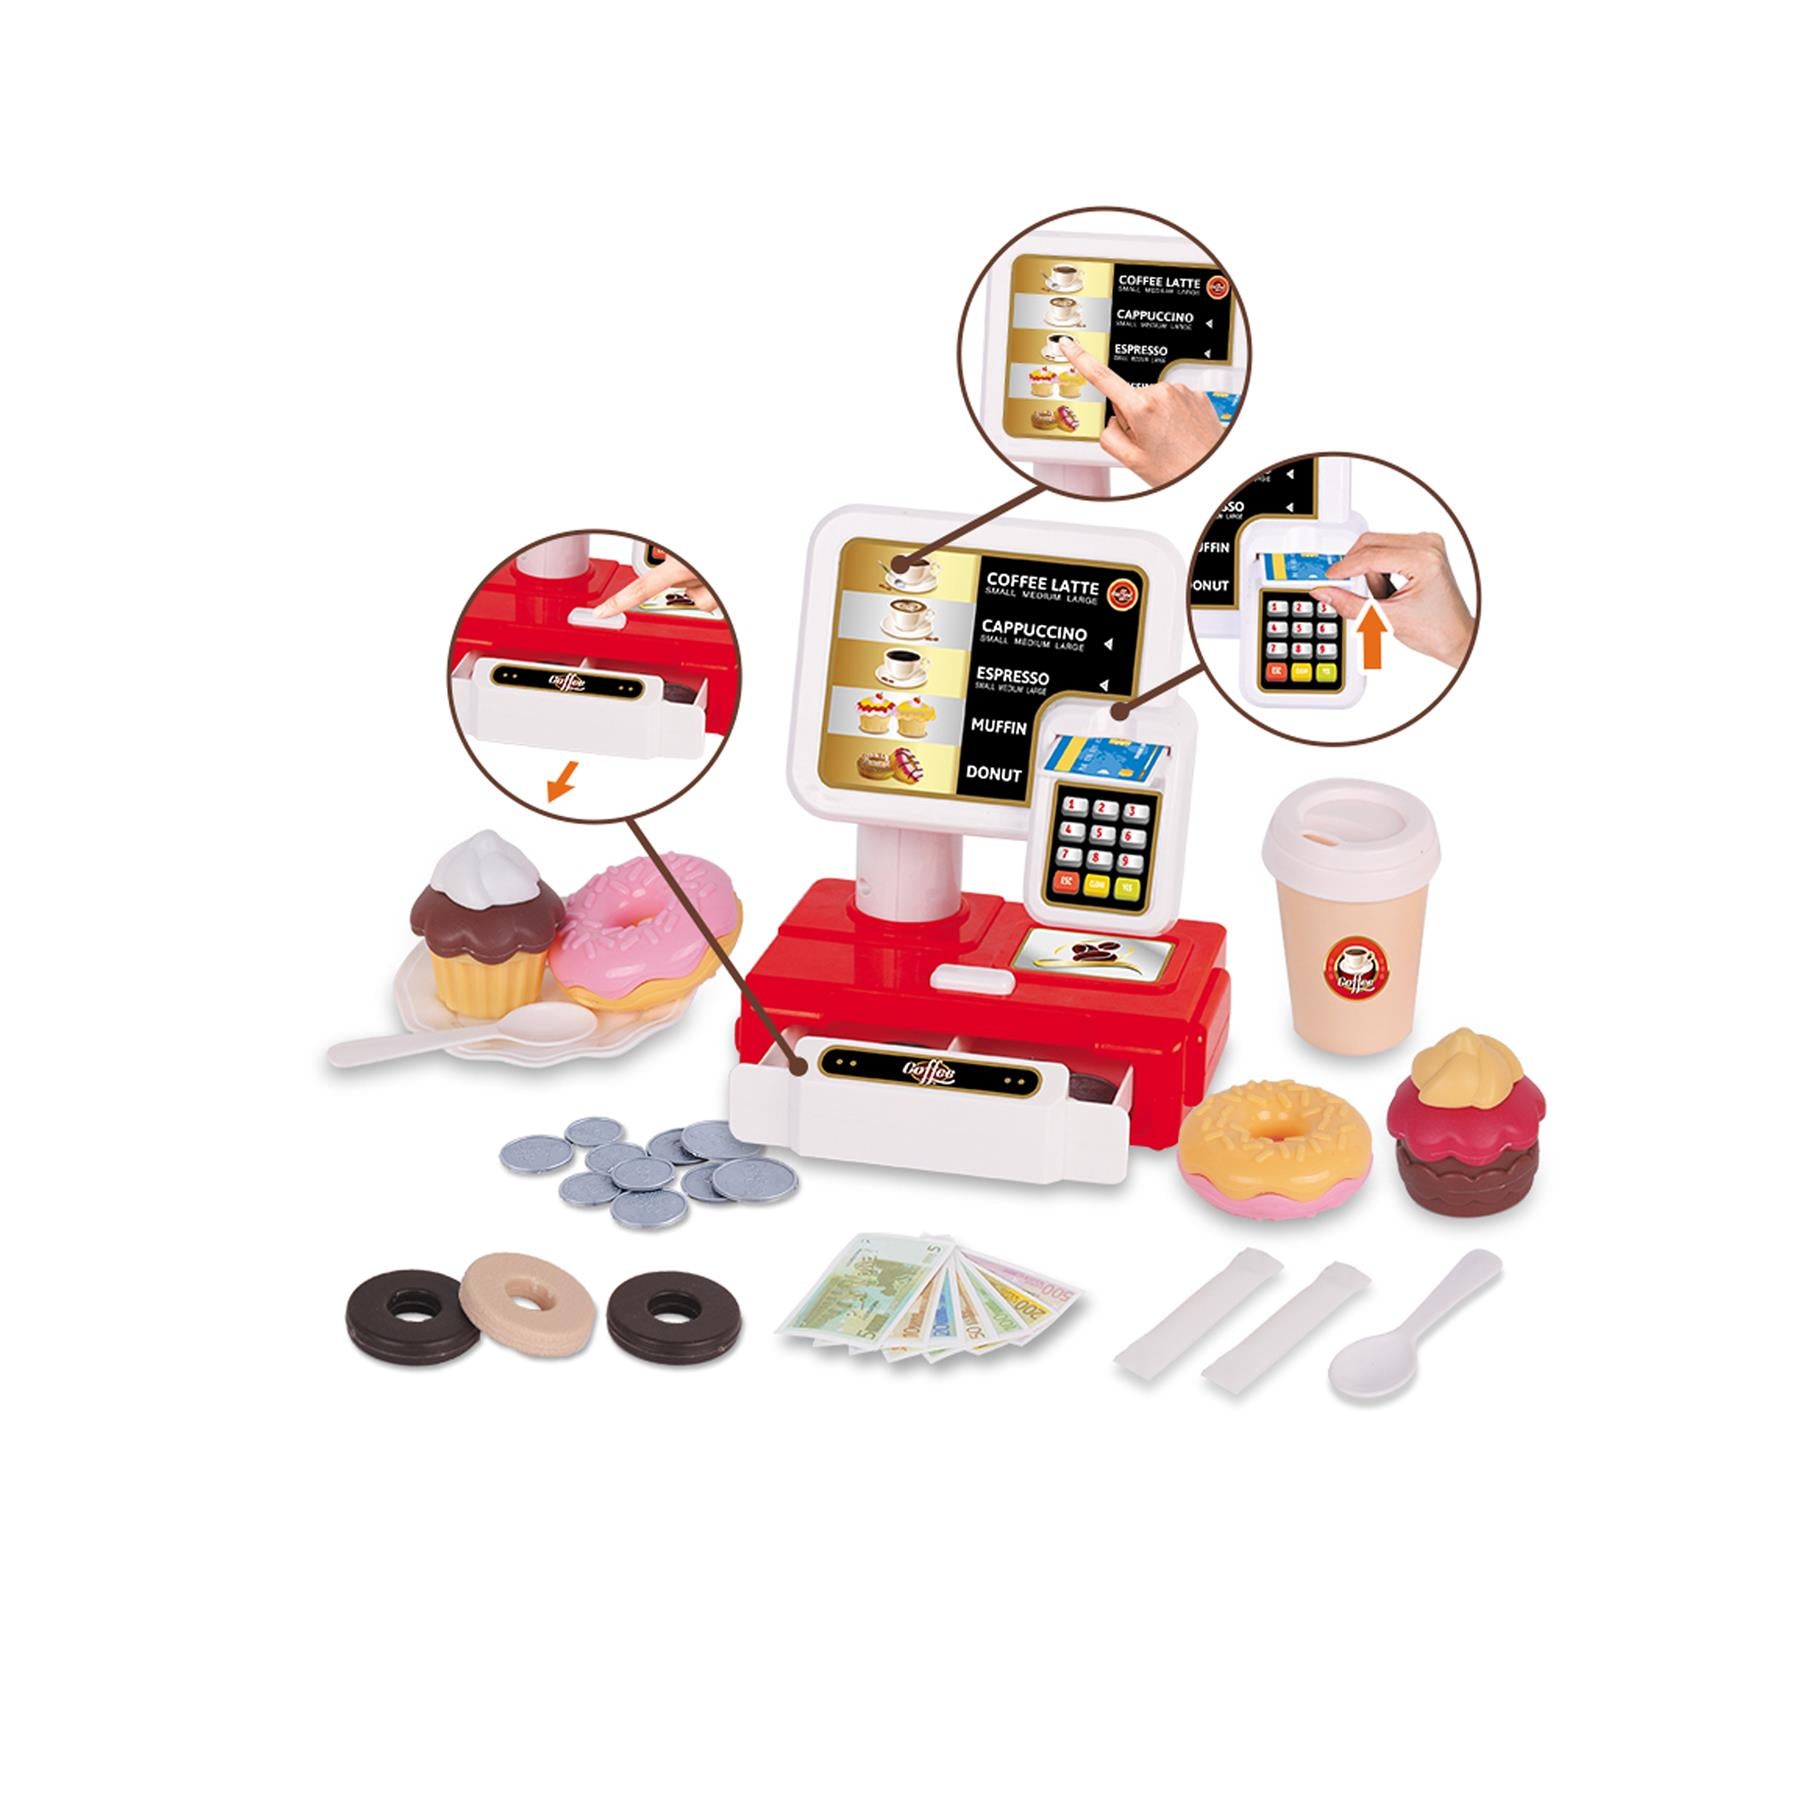 Coffee Shop Cash Register Toy Set by The Magic Toy Shop - The Magic Toy Shop